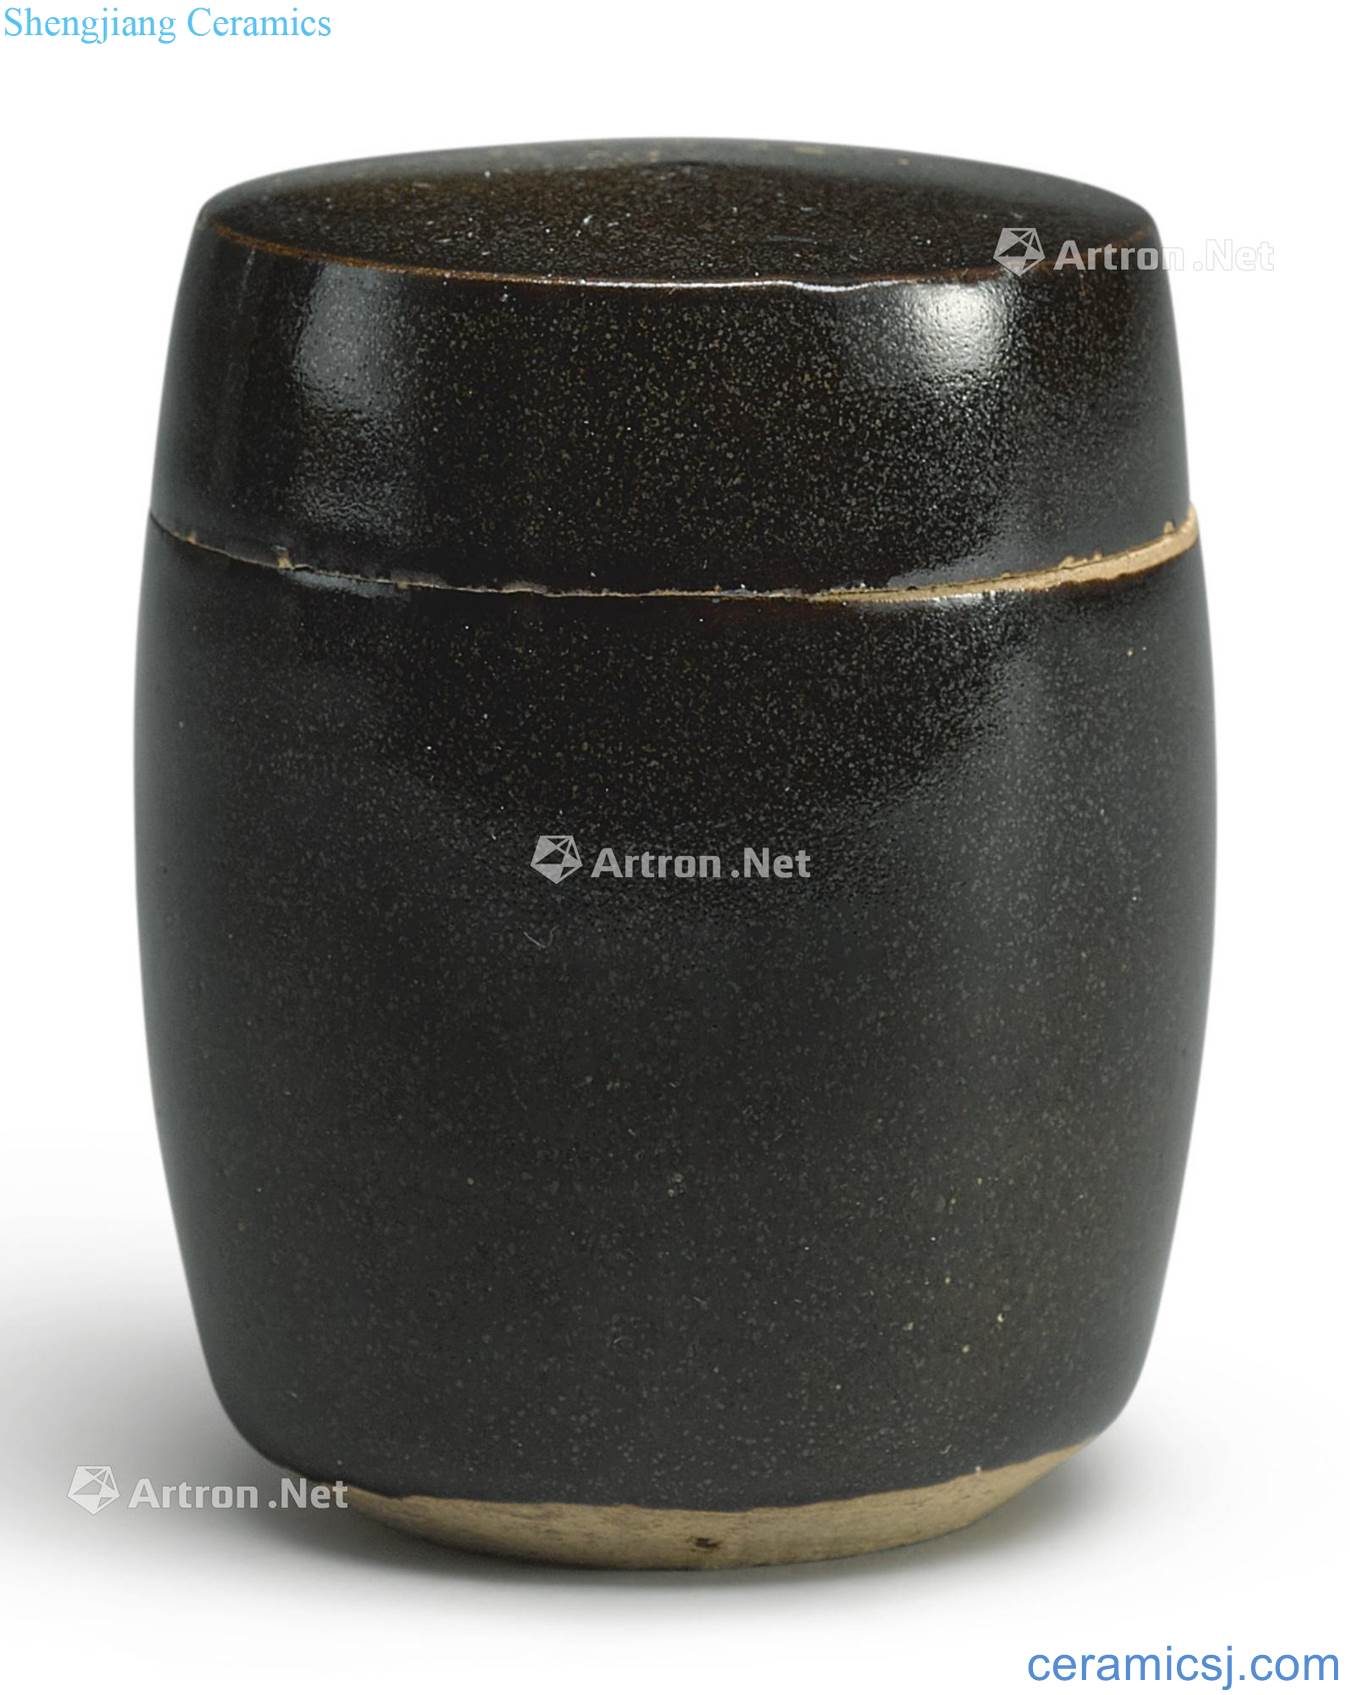 Northern song dynasty/gold magnetic state kiln black glaze tank cap